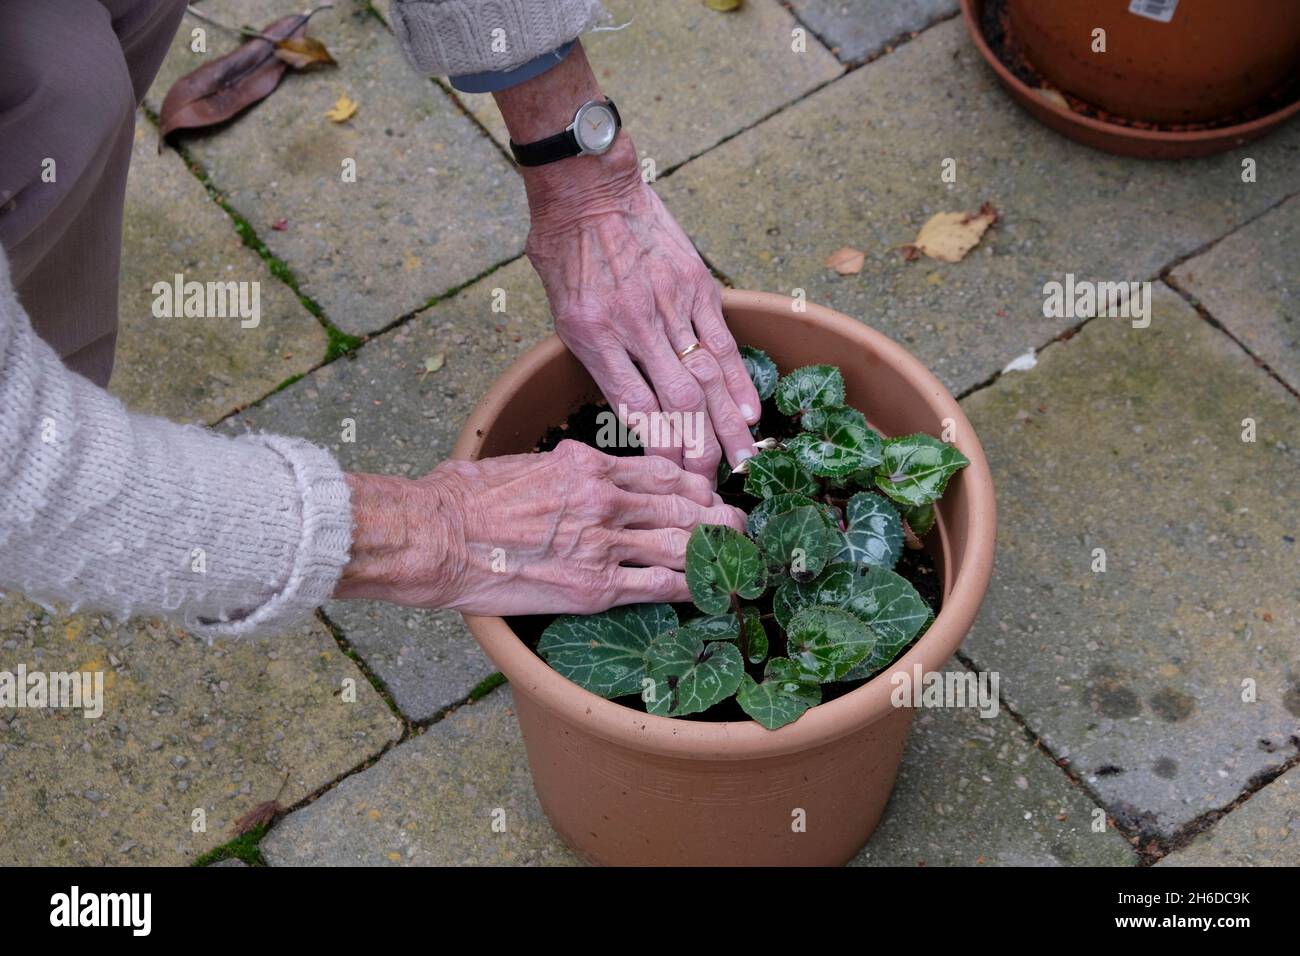 Hands of a senior lady gardening with a pot plant on a patio Stock Photo